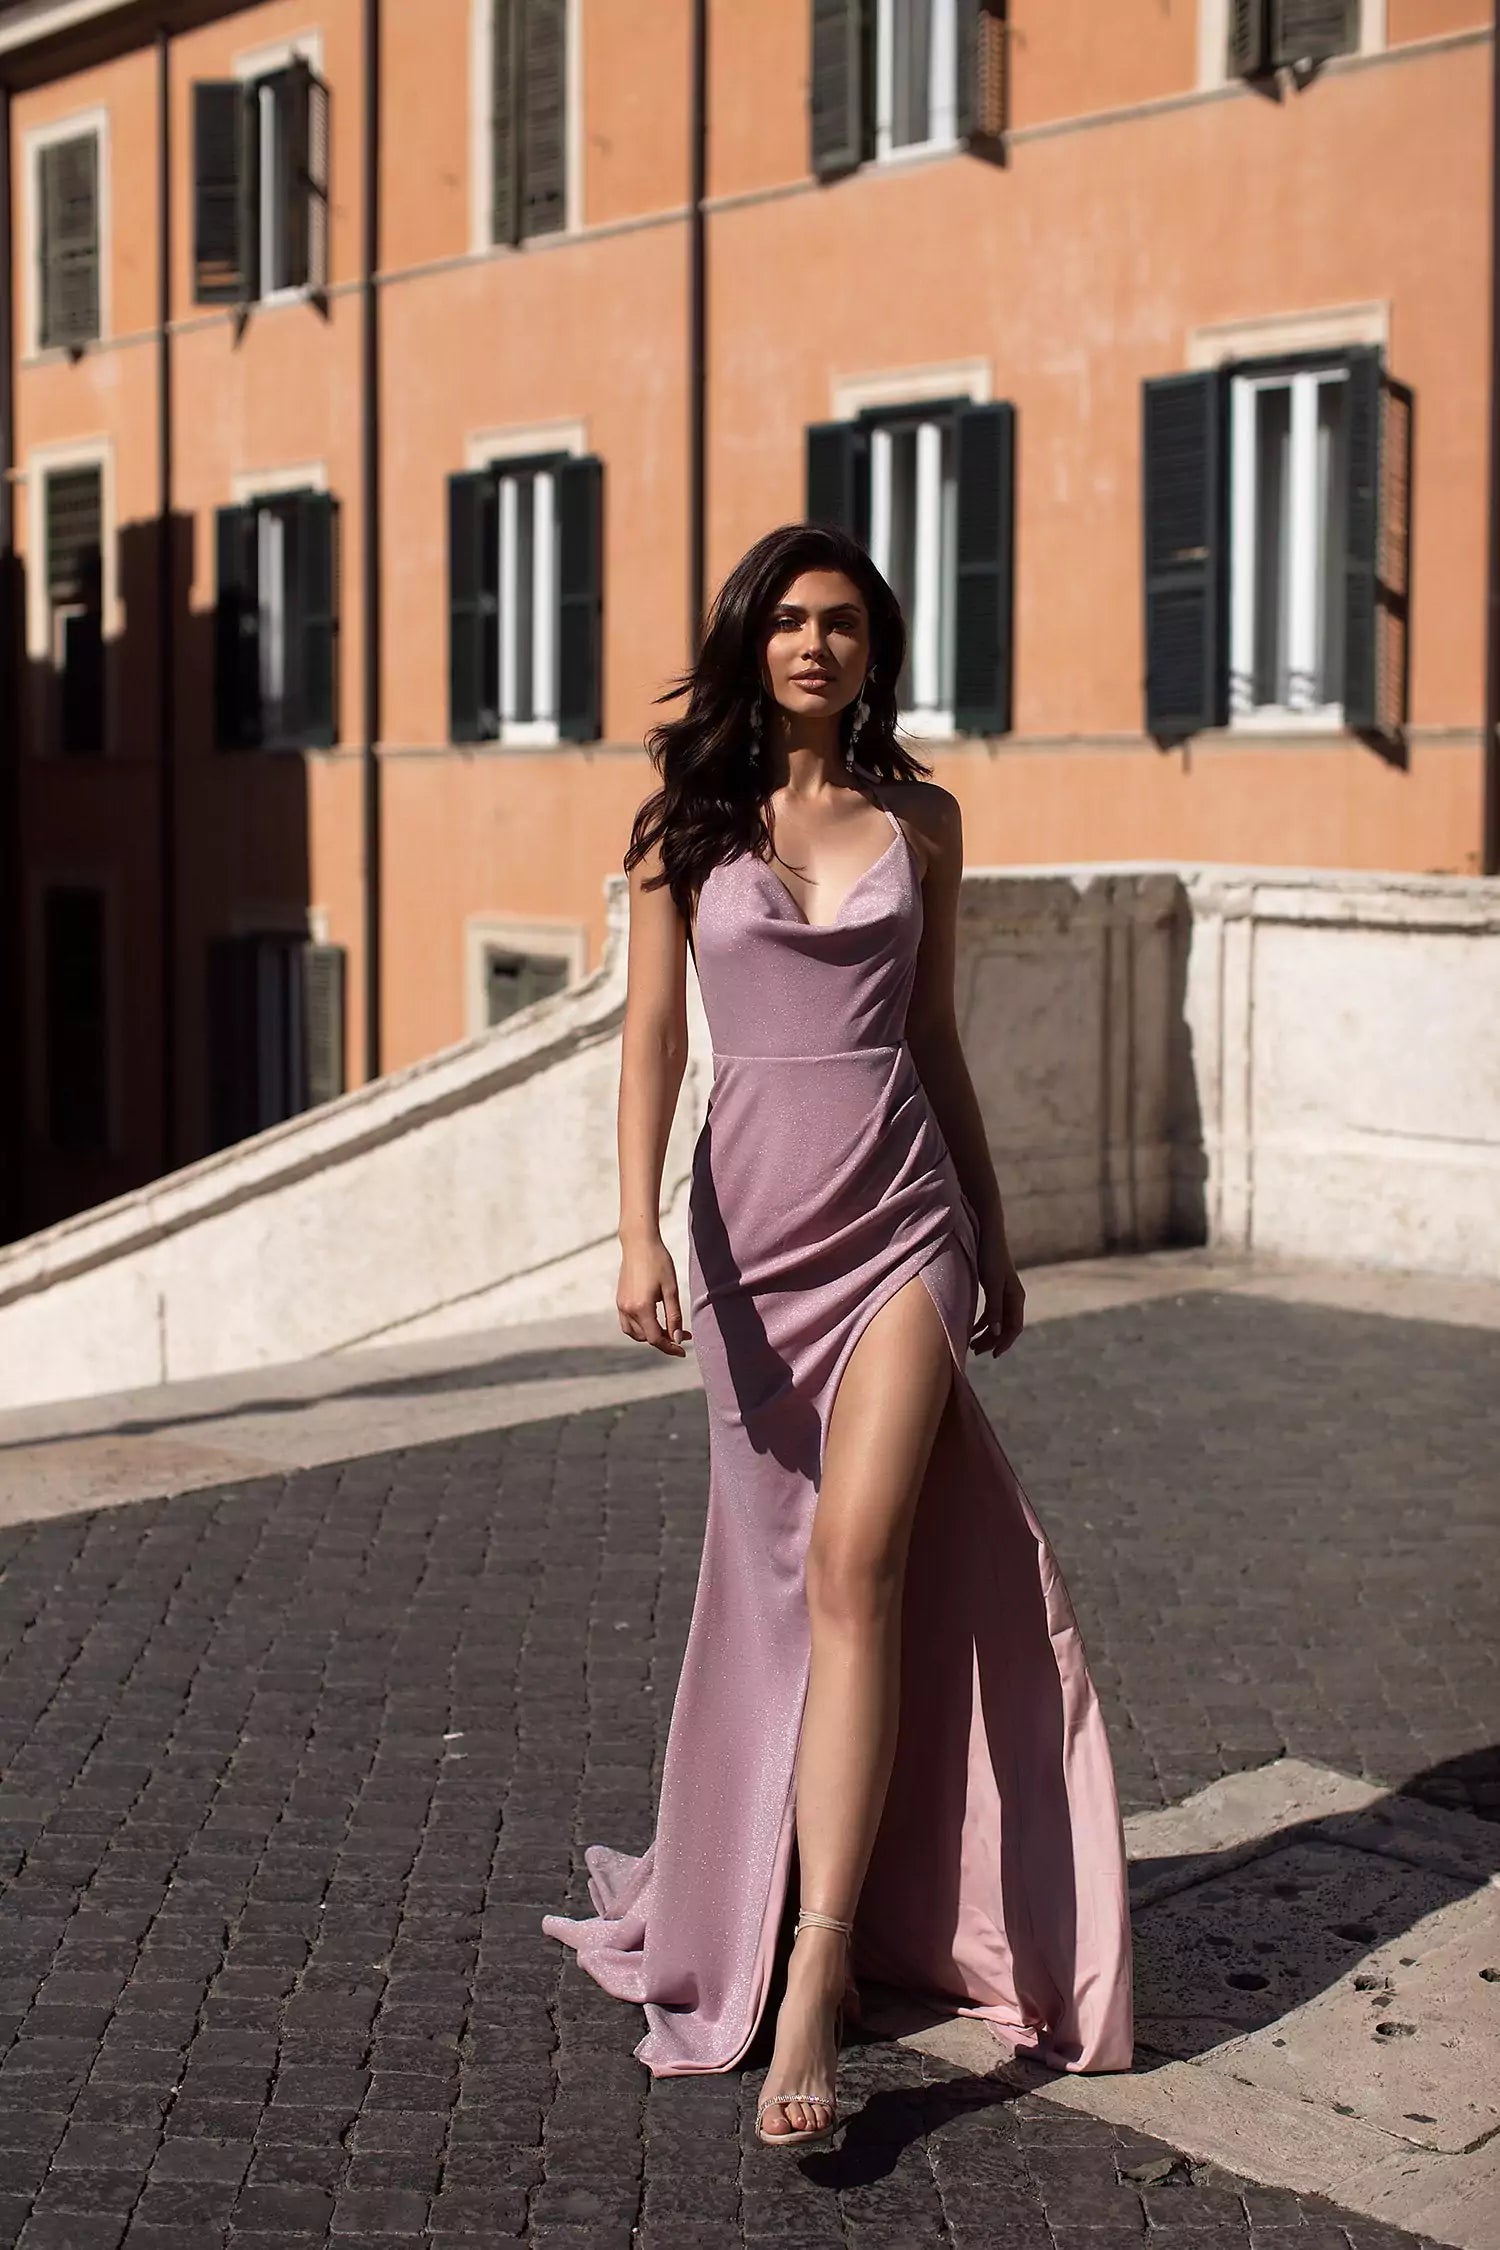 A woman in a lavender dress posing in front of a building.